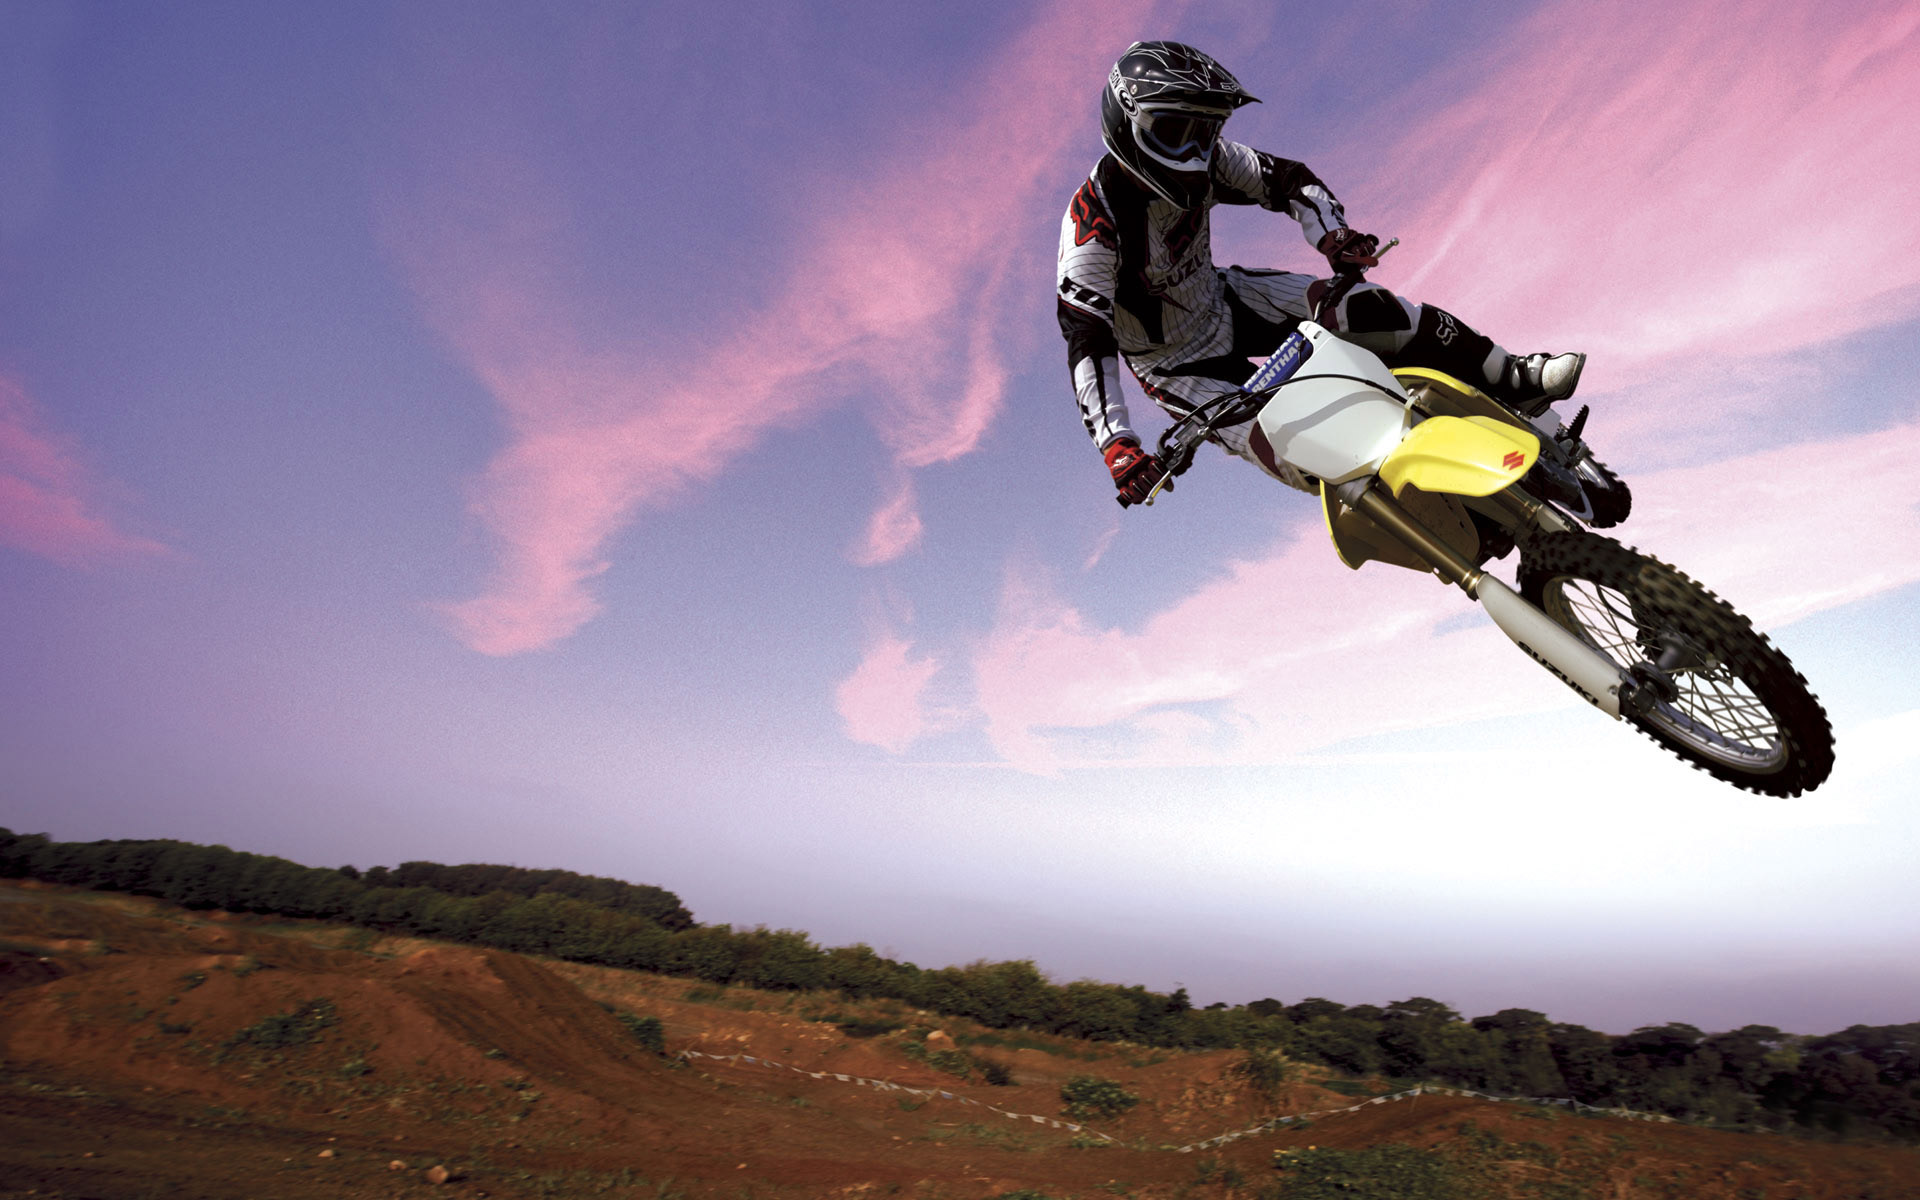 Jumping: Dirt Bike, Motocross, A closed-course motorcycle race, Extreme sports, Bike jumping. 1920x1200 HD Background.